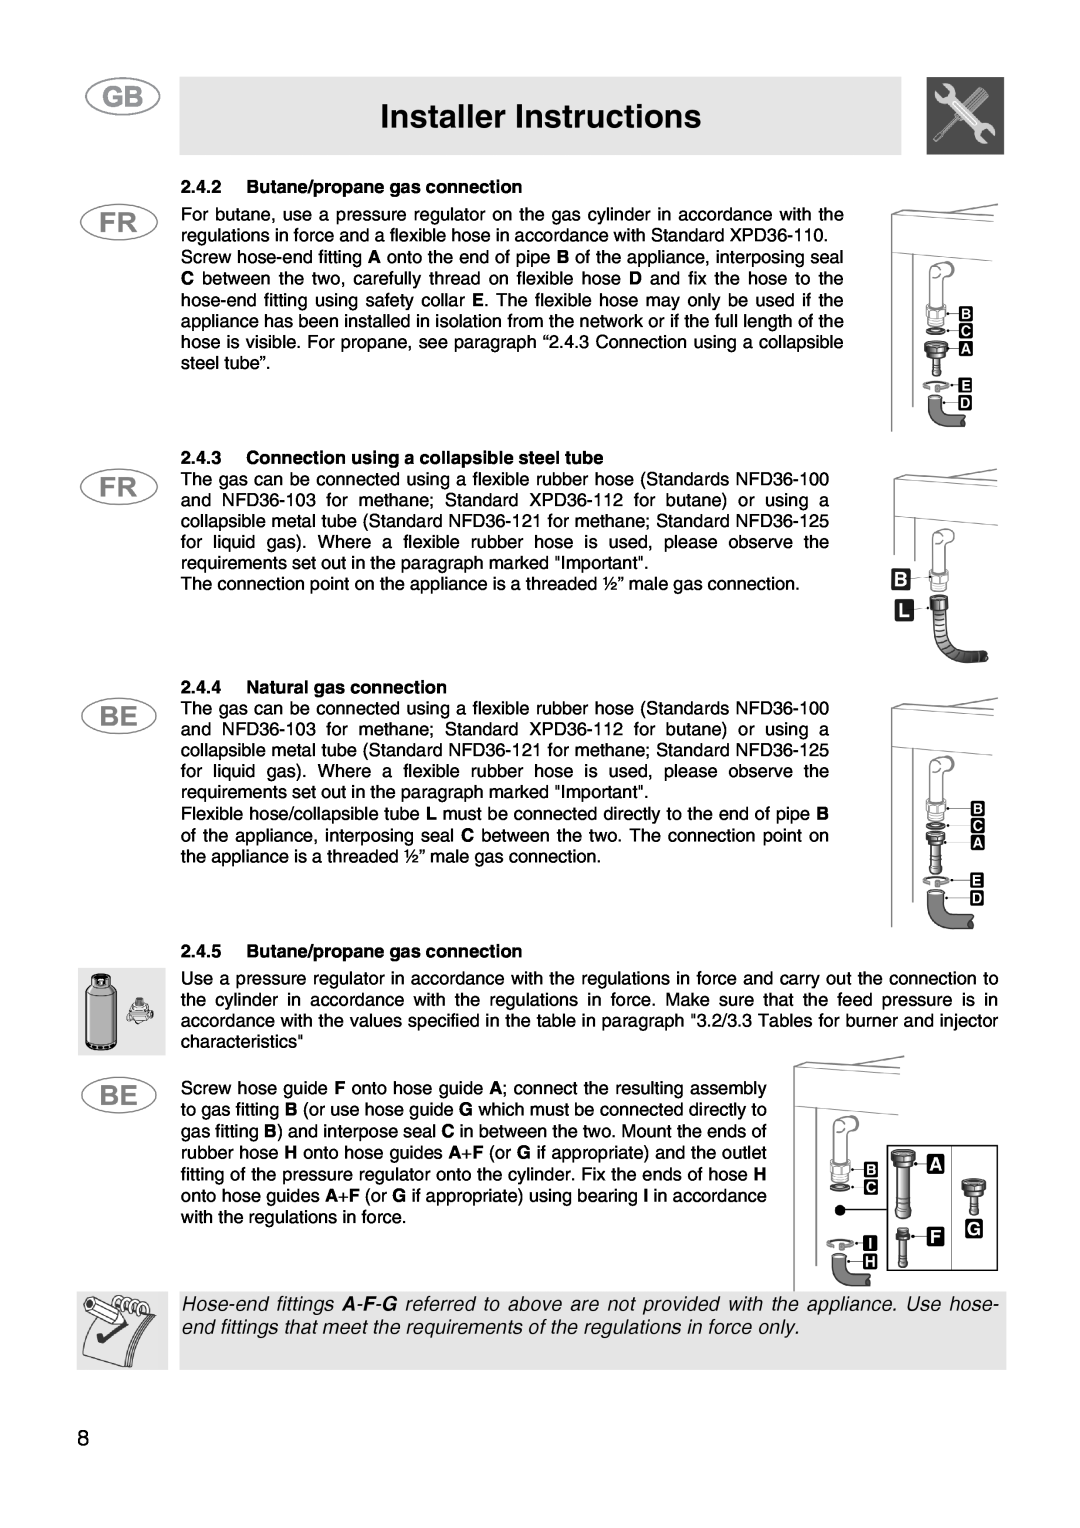 Smeg CS15-5 Installer Instructions, 2.4.2Butane/propane gas connection, 2.4.3Connection using a collapsible steel tube 